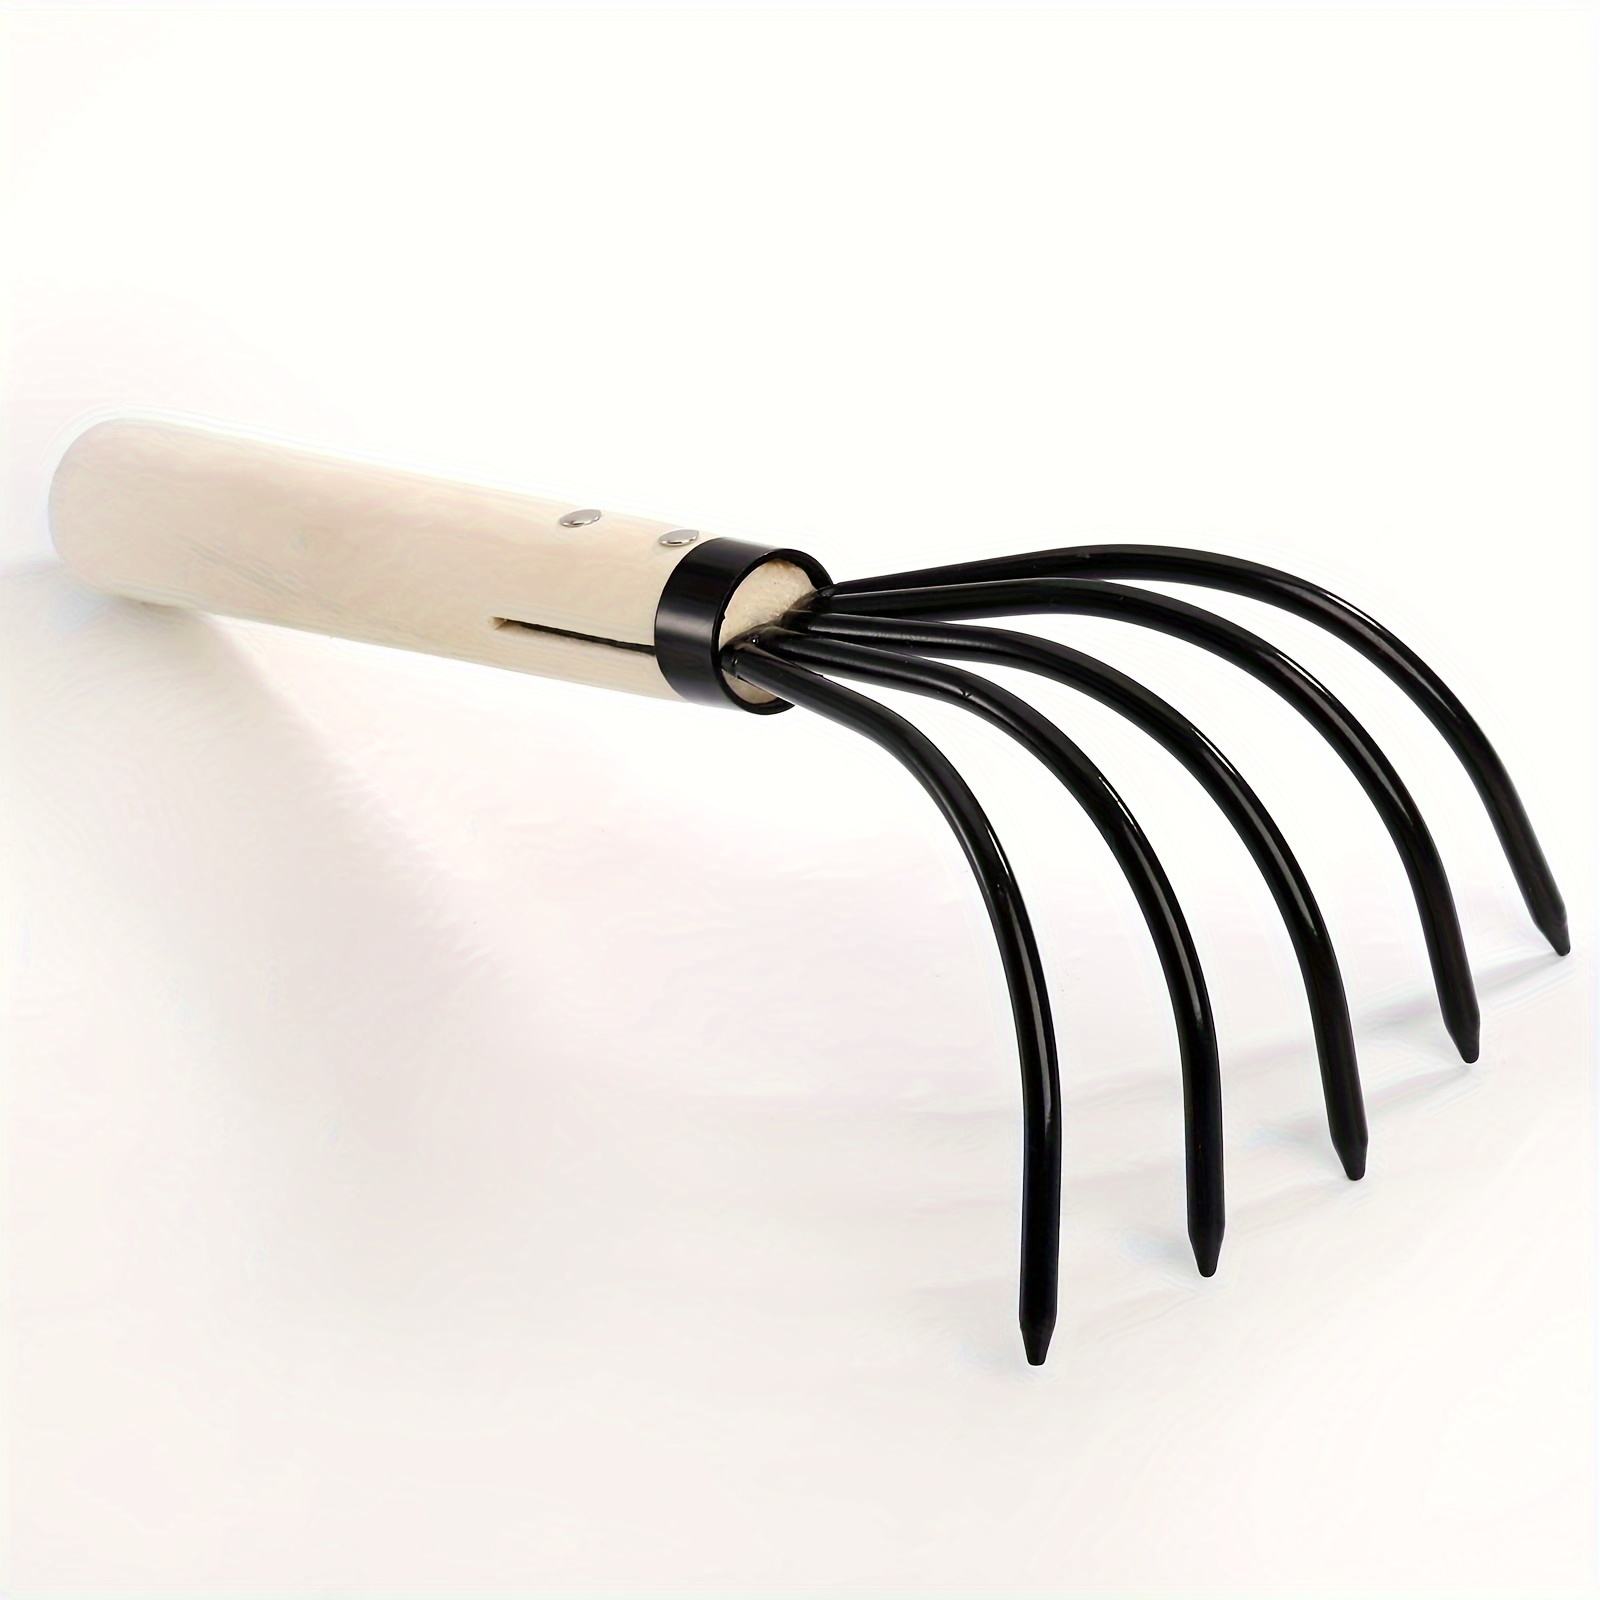 Collapsible Sand Fleas Rake Stainless Steel Sand Sifter Long